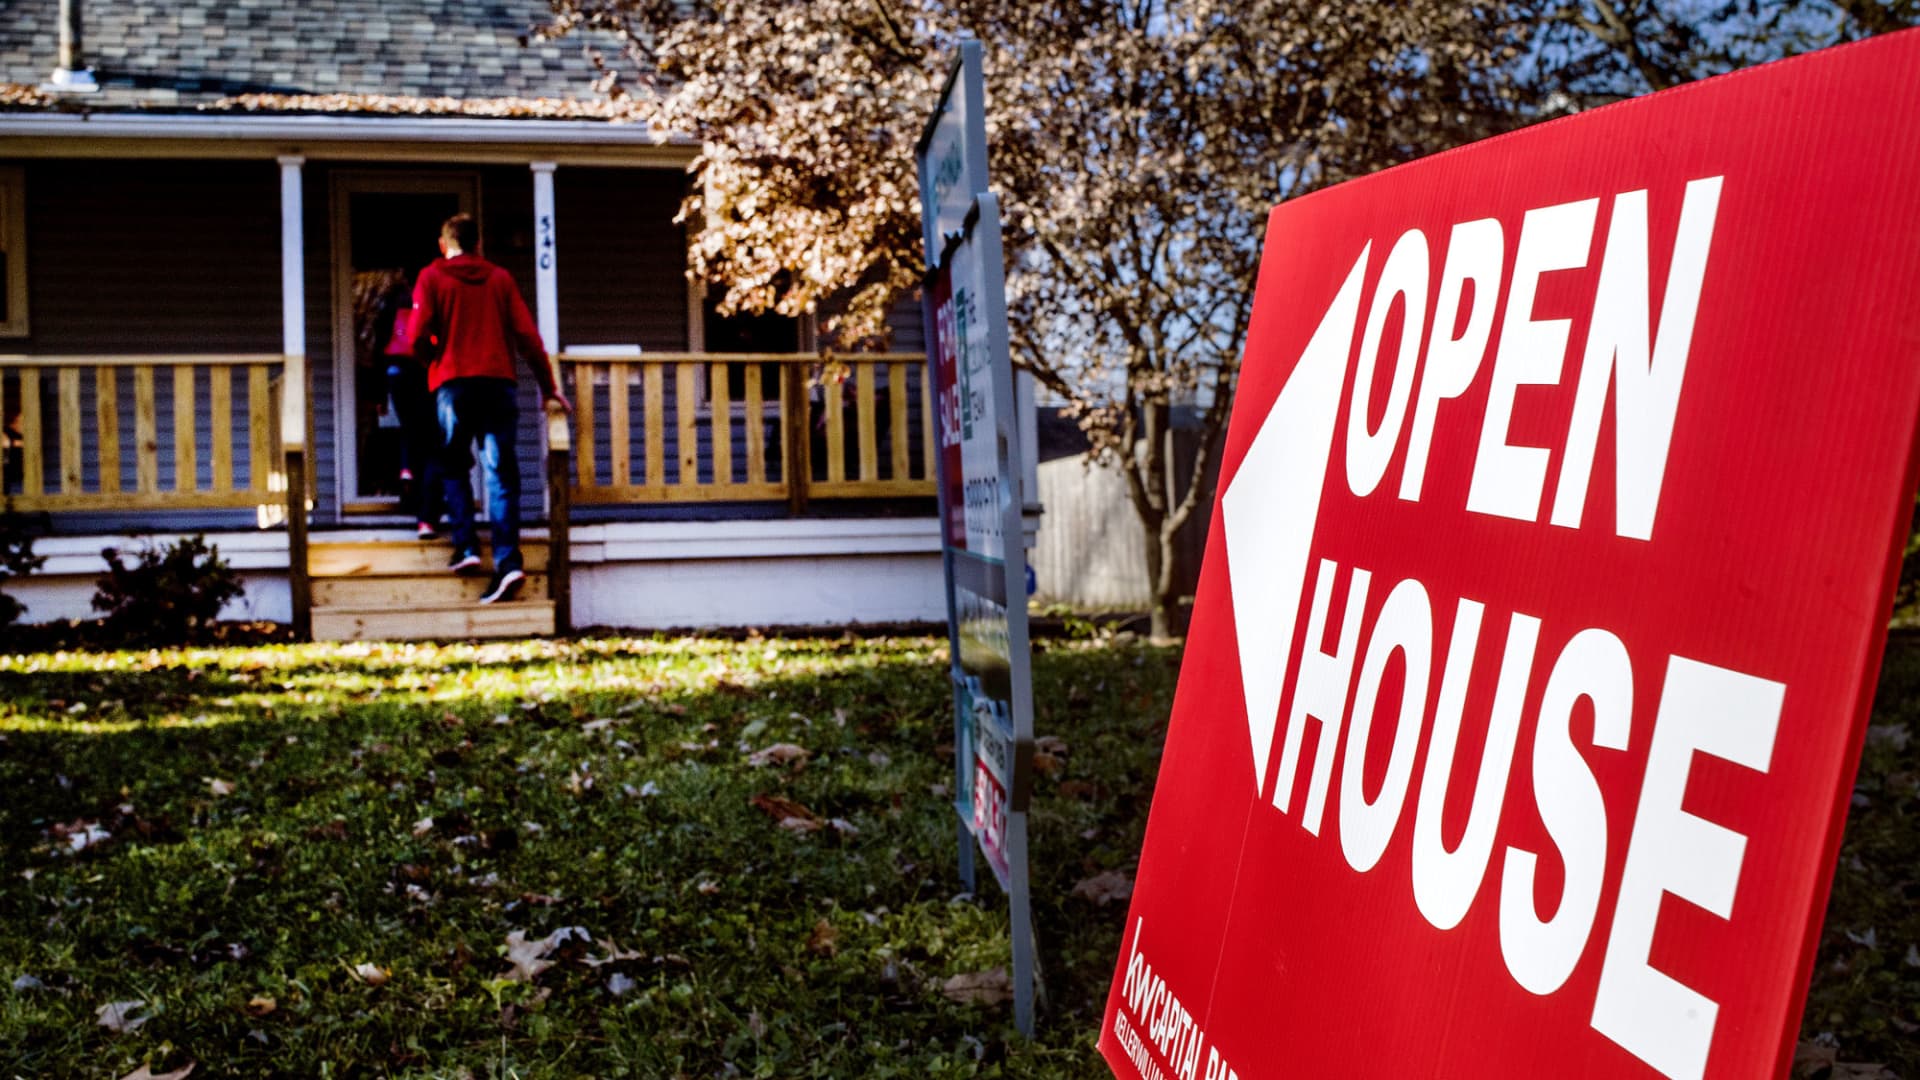 Shopper confidence within the housing market hits a brand new low, based on Fannie Mae